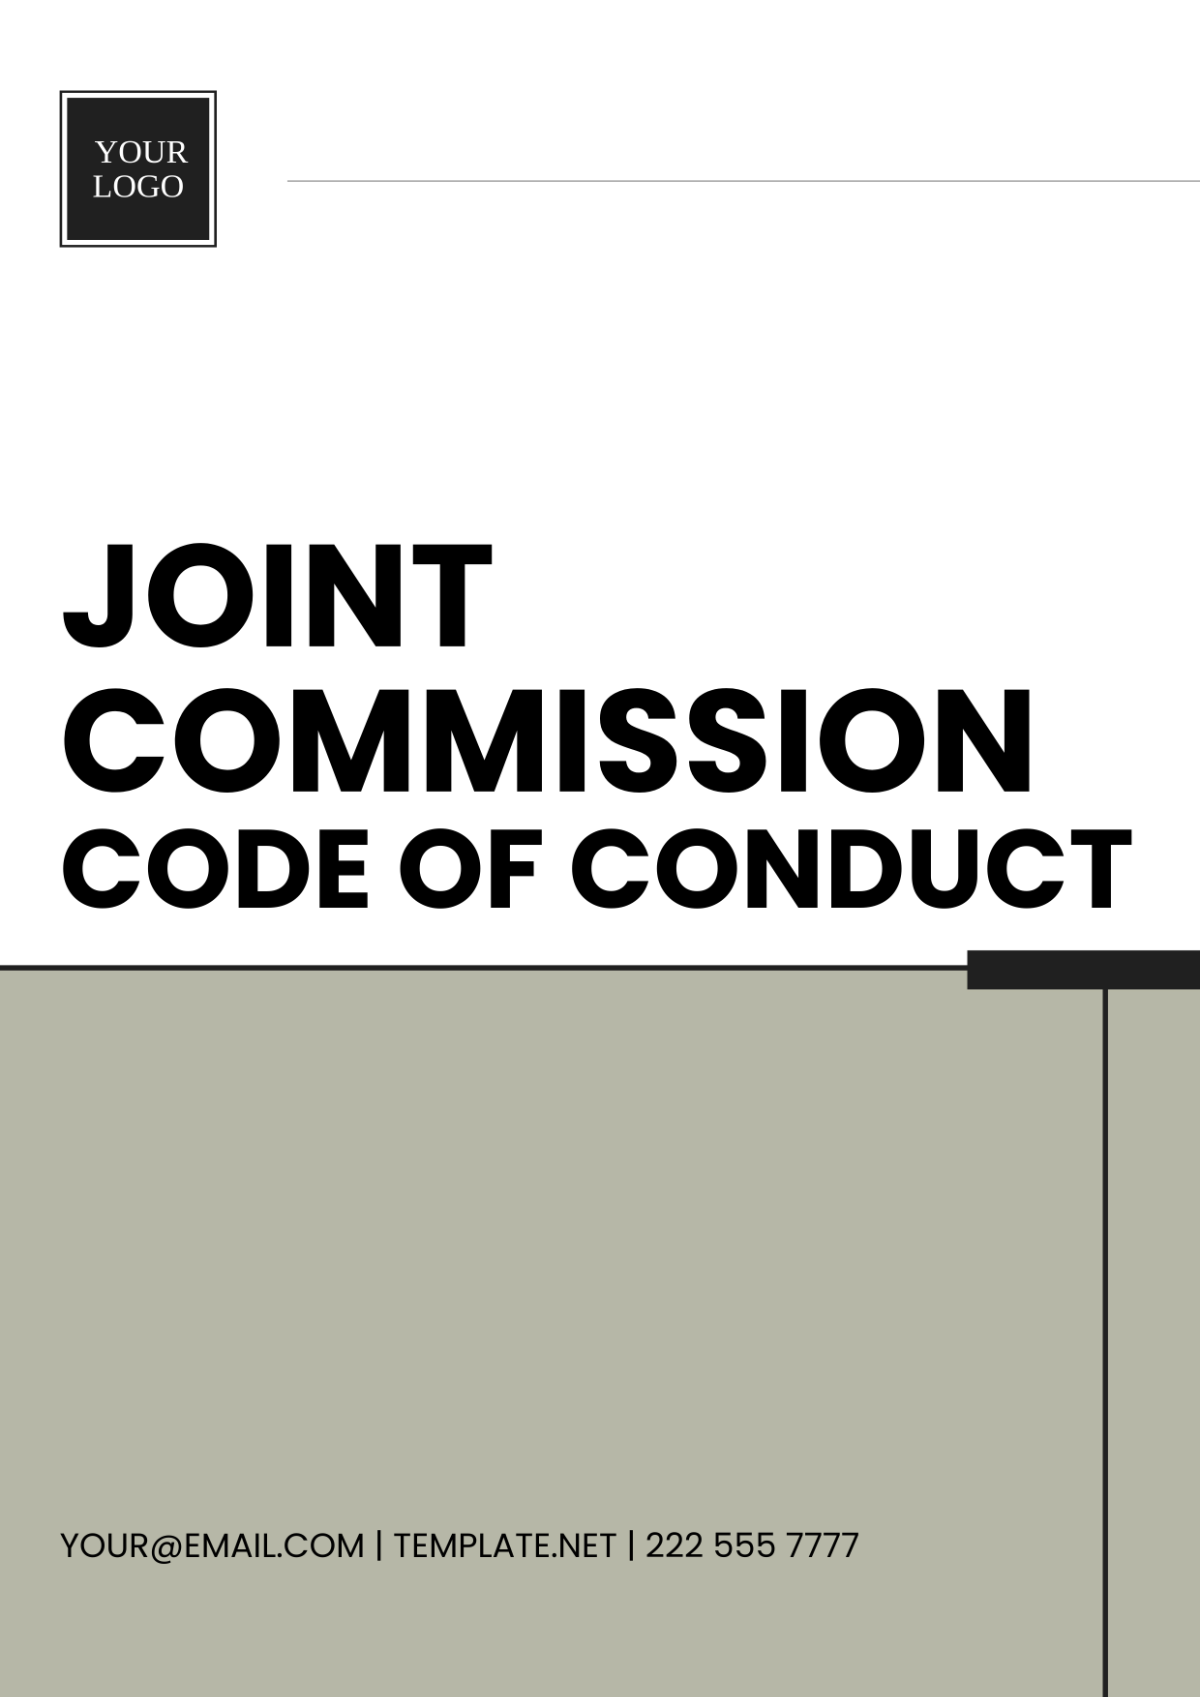 Joint Commission Code of Conduct Template